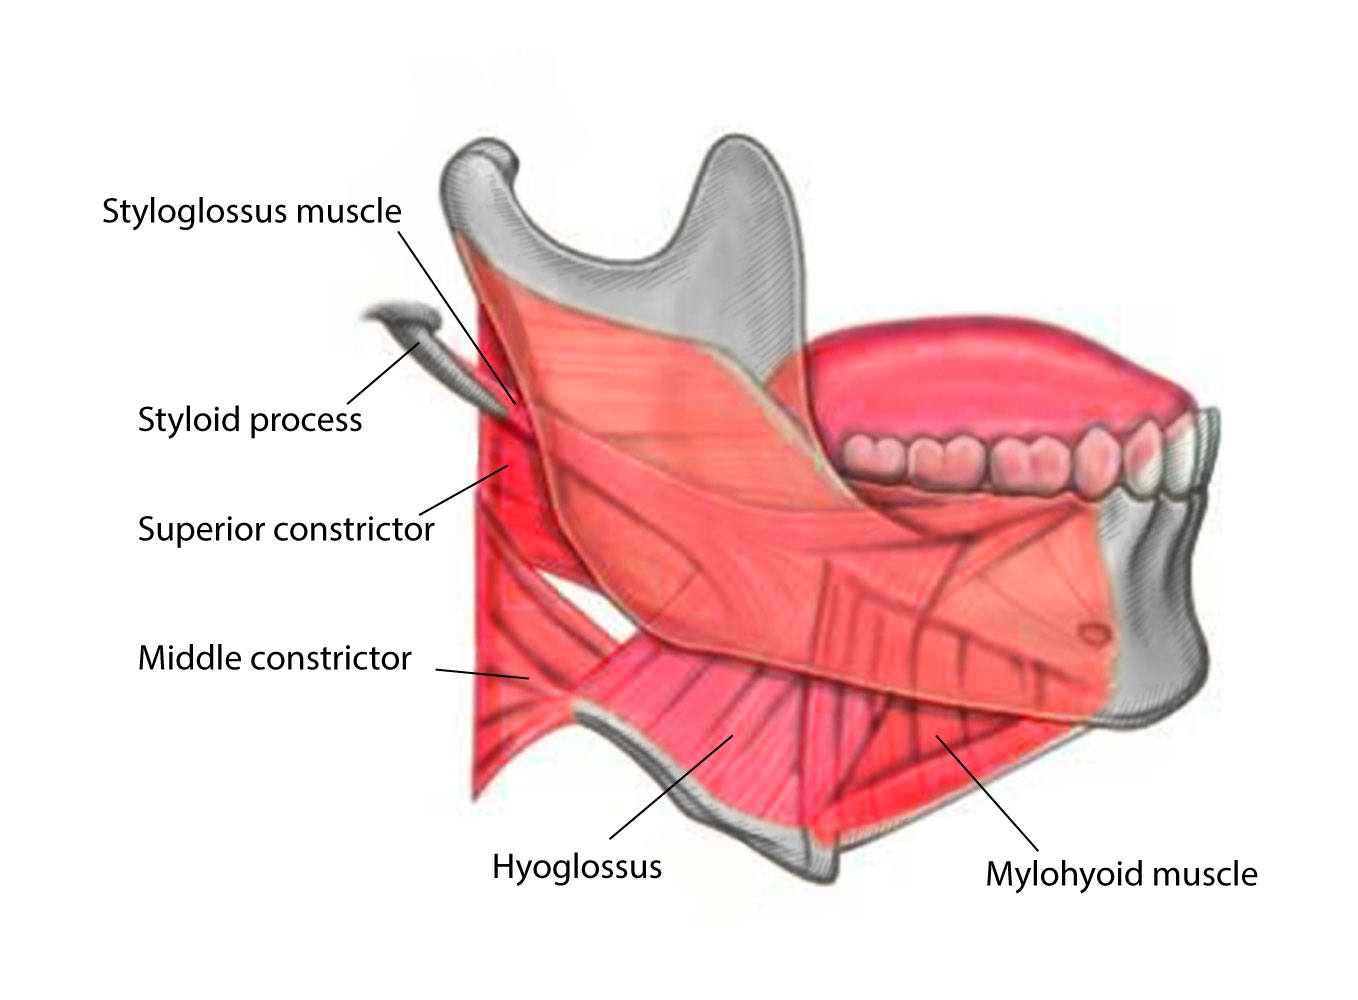 <p>Styloglossus, Middle Constrictor, Hyoglossus, and Mylohyoid Muscles</p>